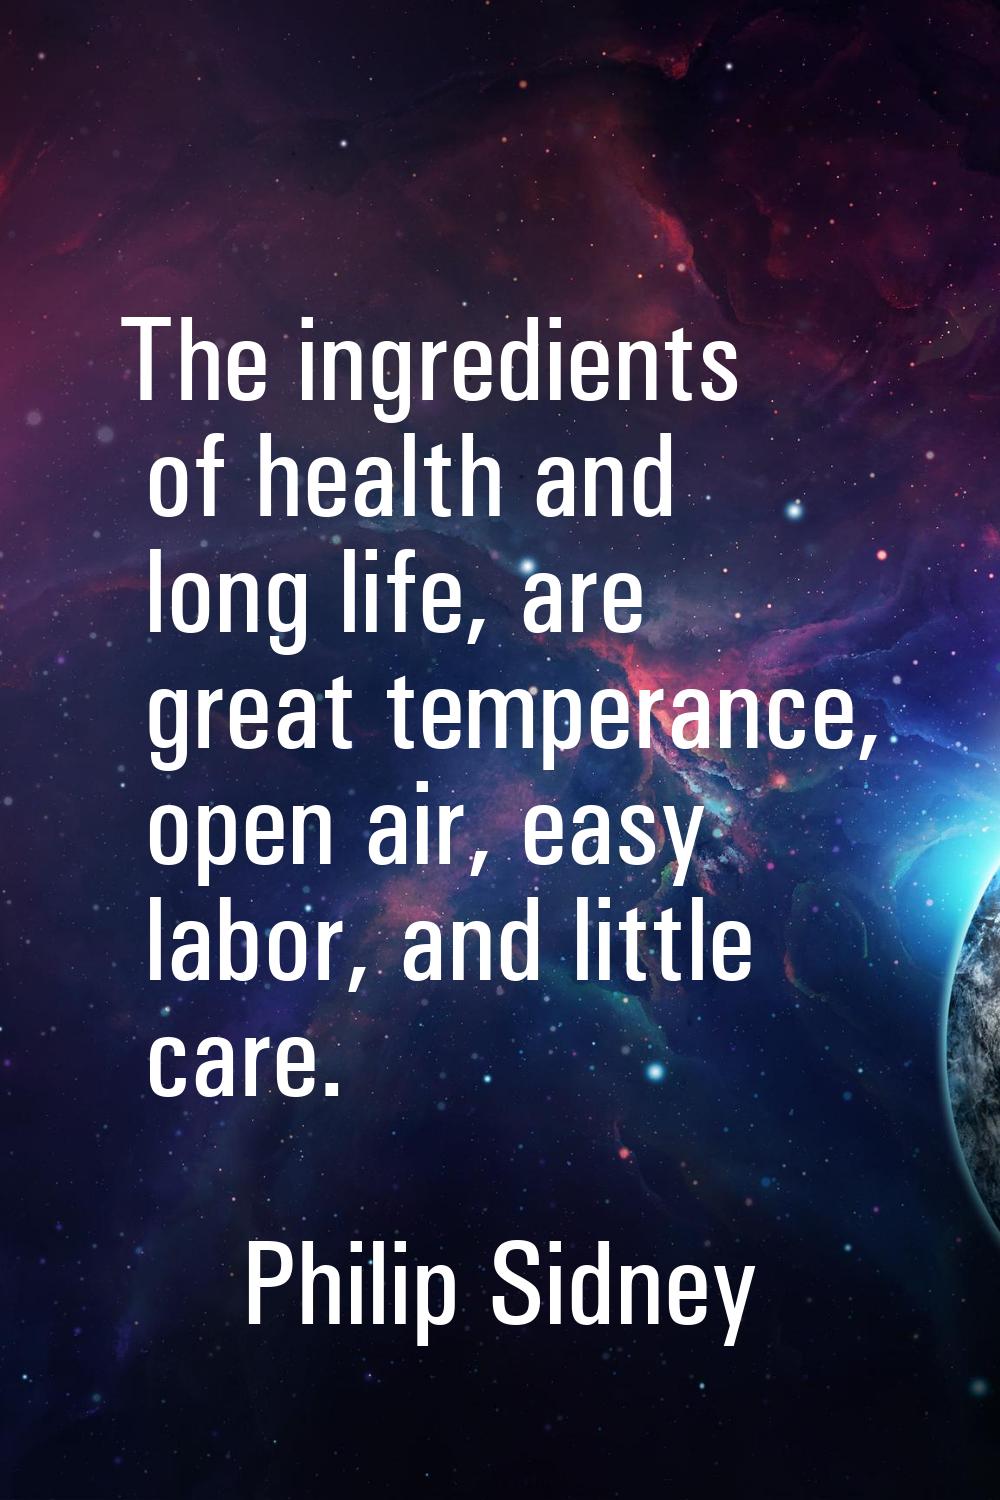 The ingredients of health and long life, are great temperance, open air, easy labor, and little car